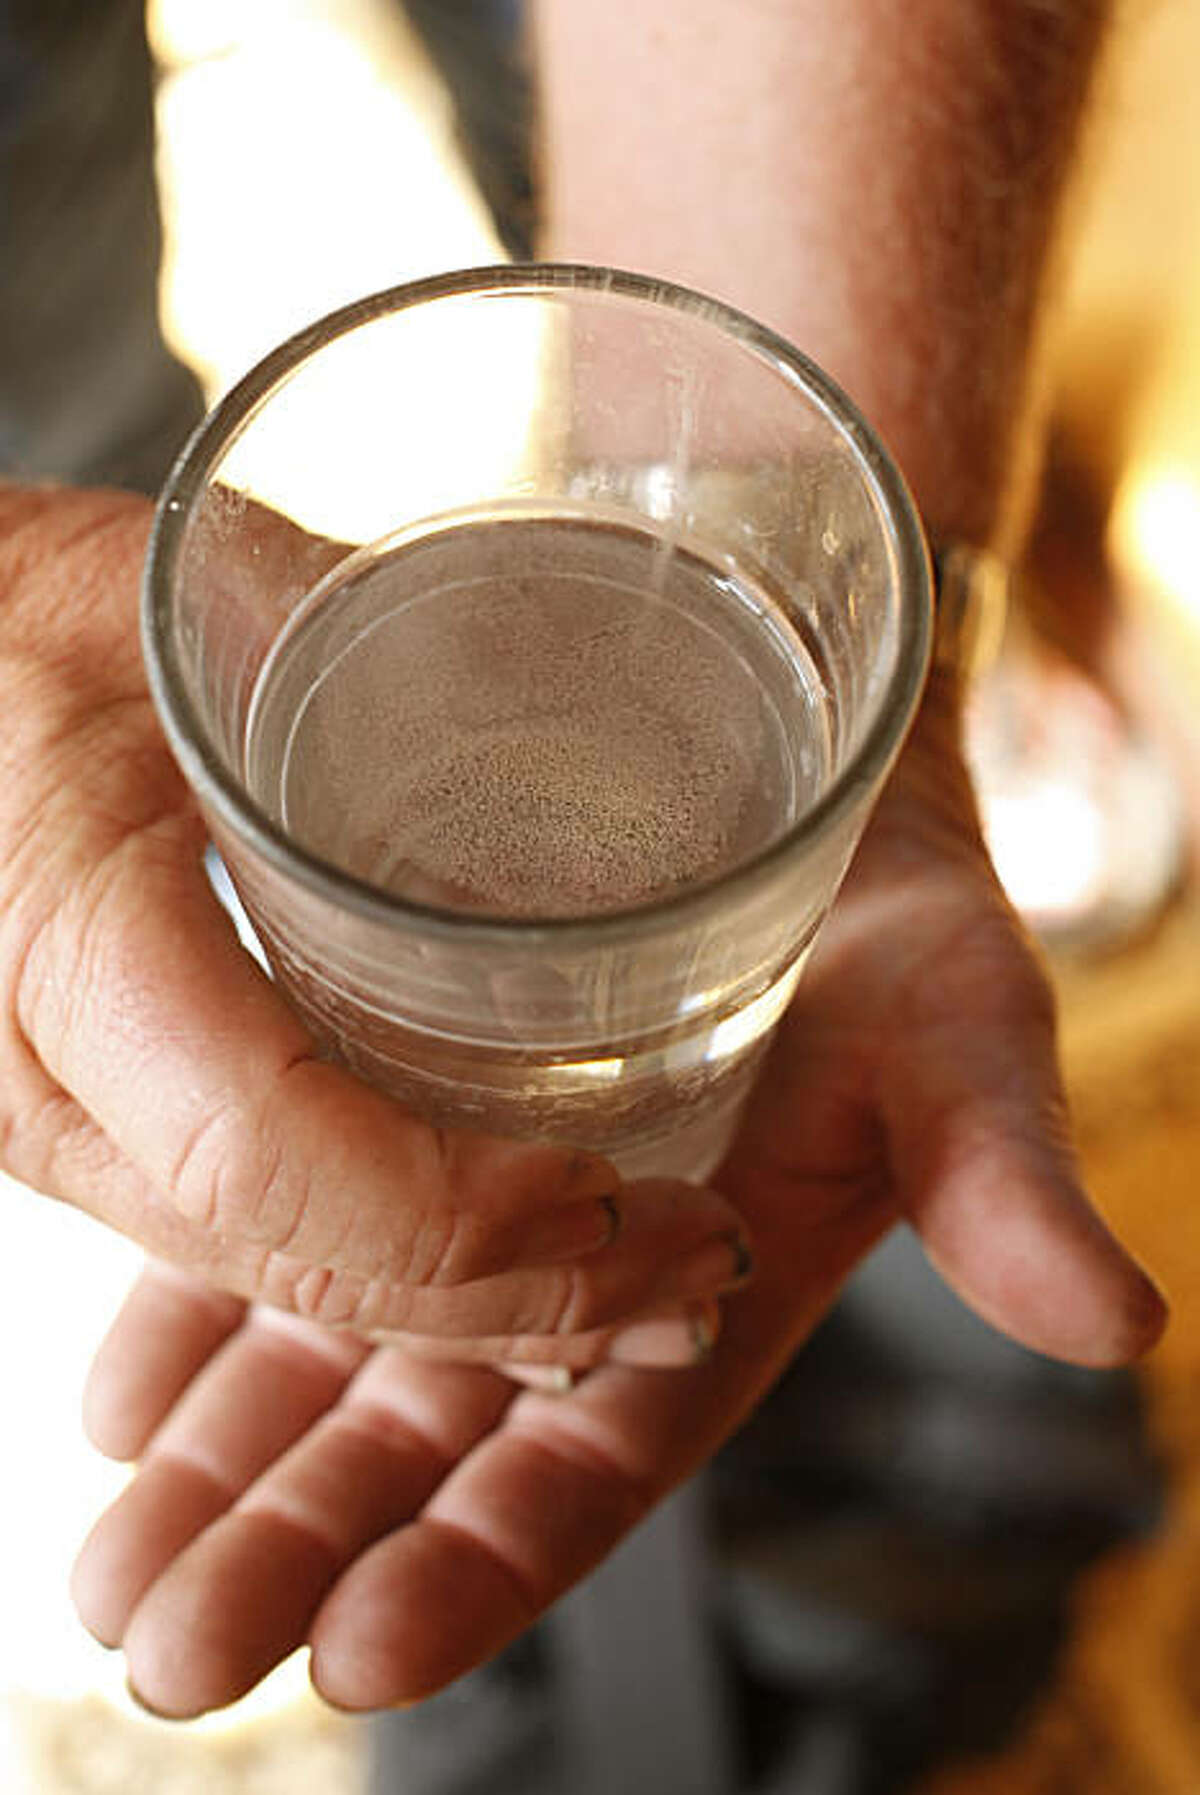 John Sanders, who lives near the Hilmar Cheese Company, holds a glass of water that has a white film floating on the surface in Hilmar, Calif., on August 20, 2010.